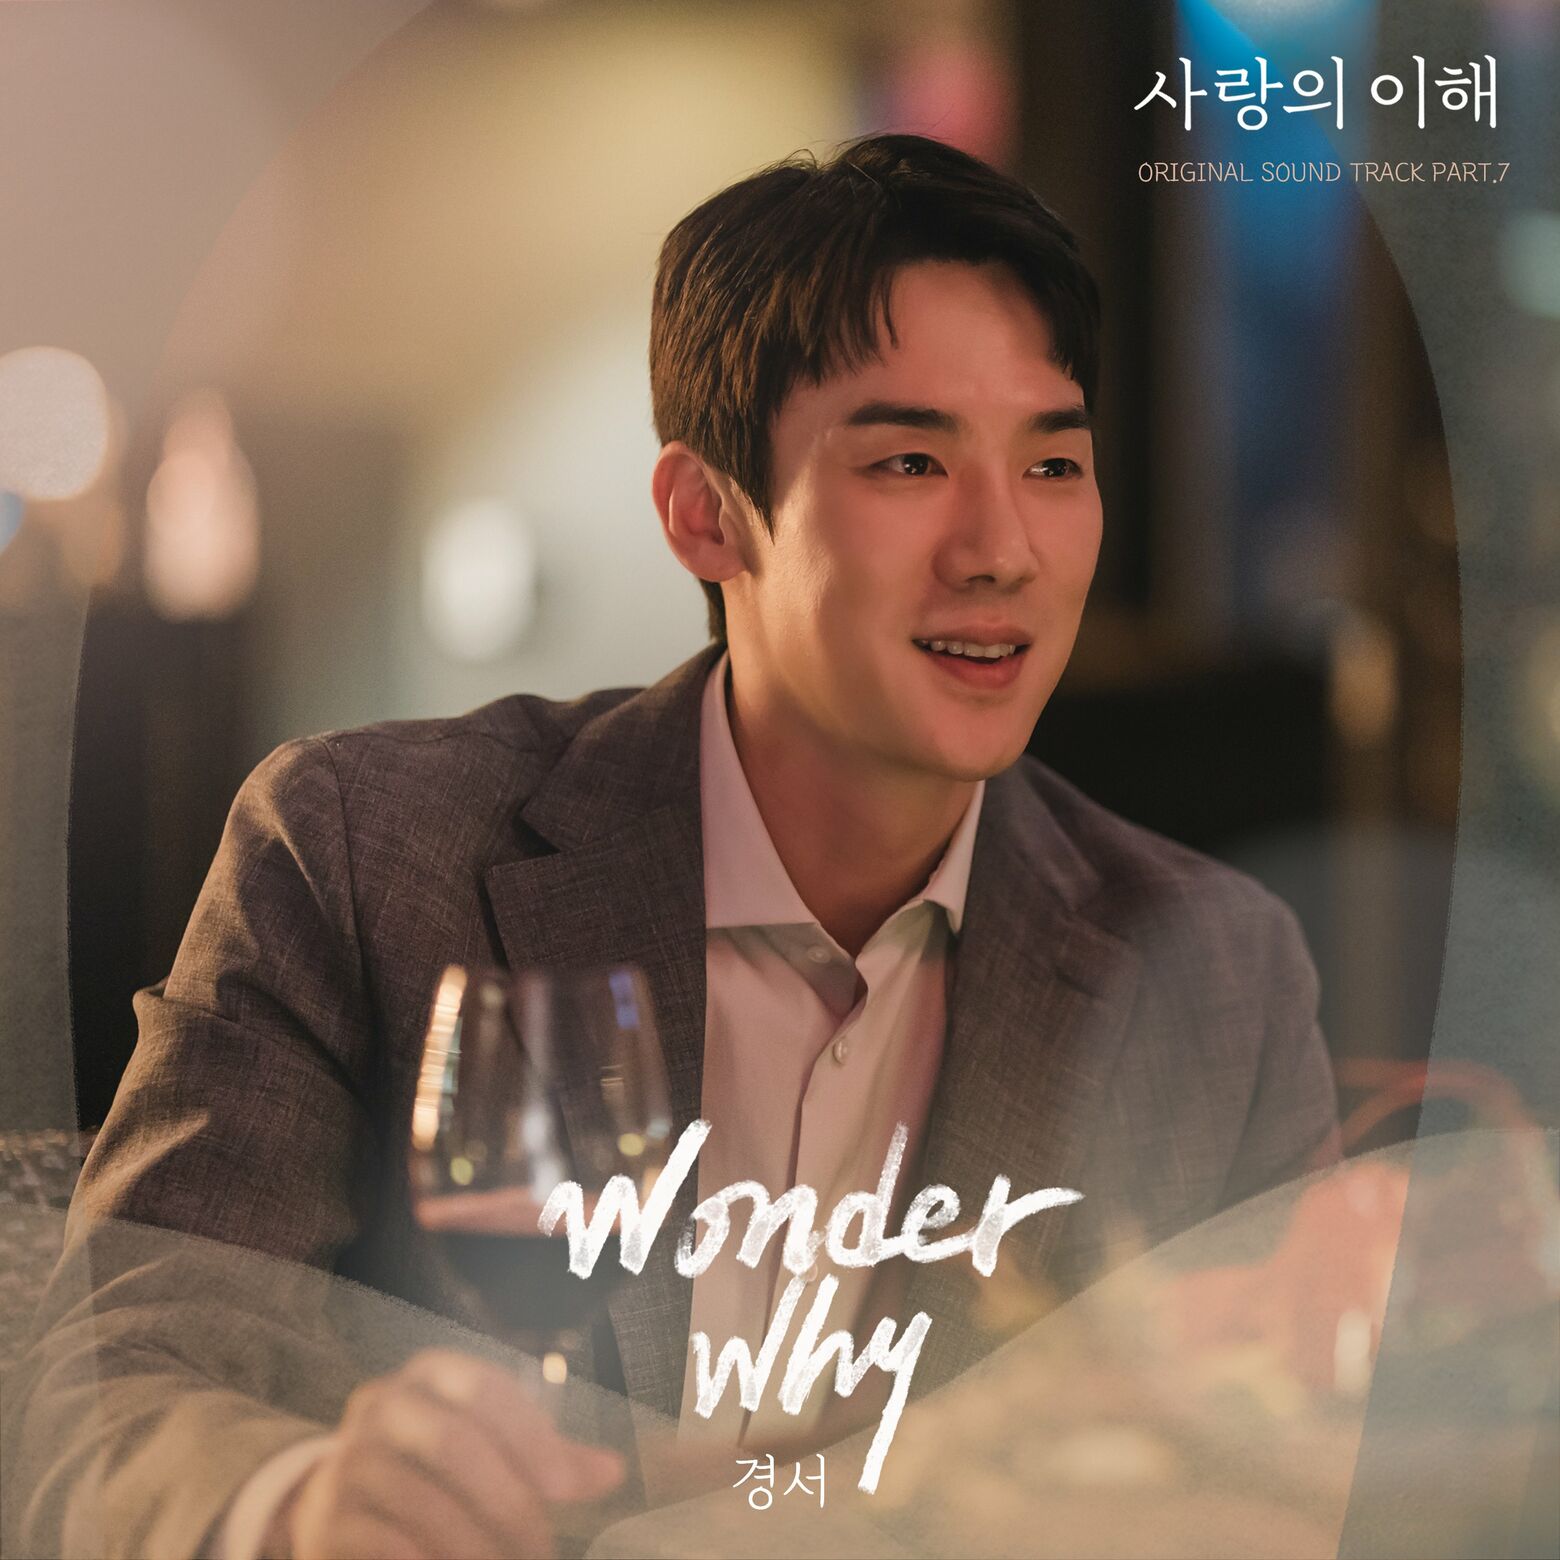 KyoungSeo – The Interest of Love (OST, Pt. 7)